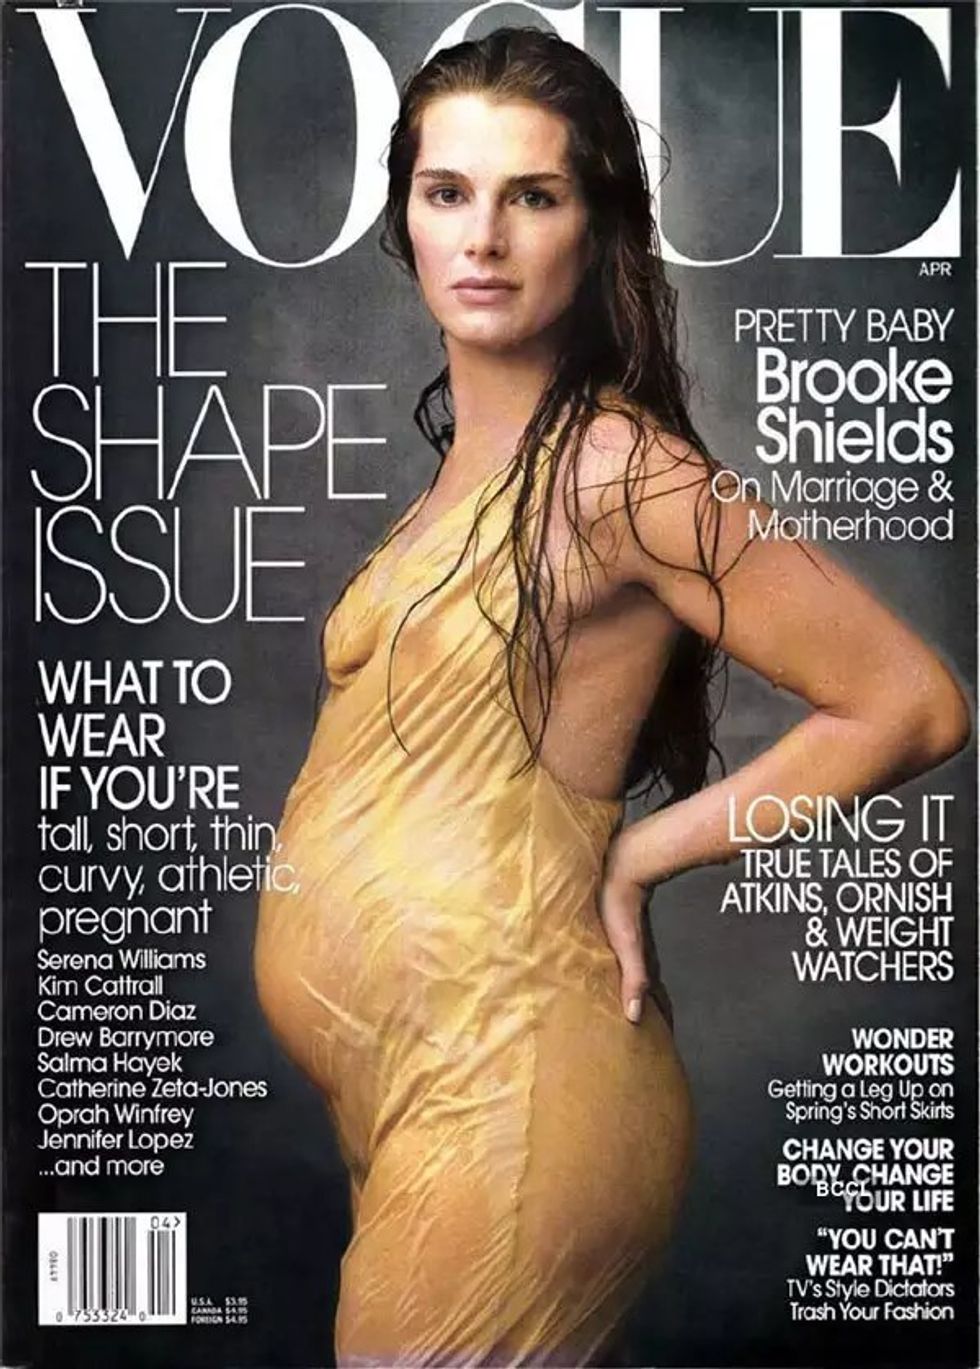 Brooke Shields Today: Vogue Cover Pregnant